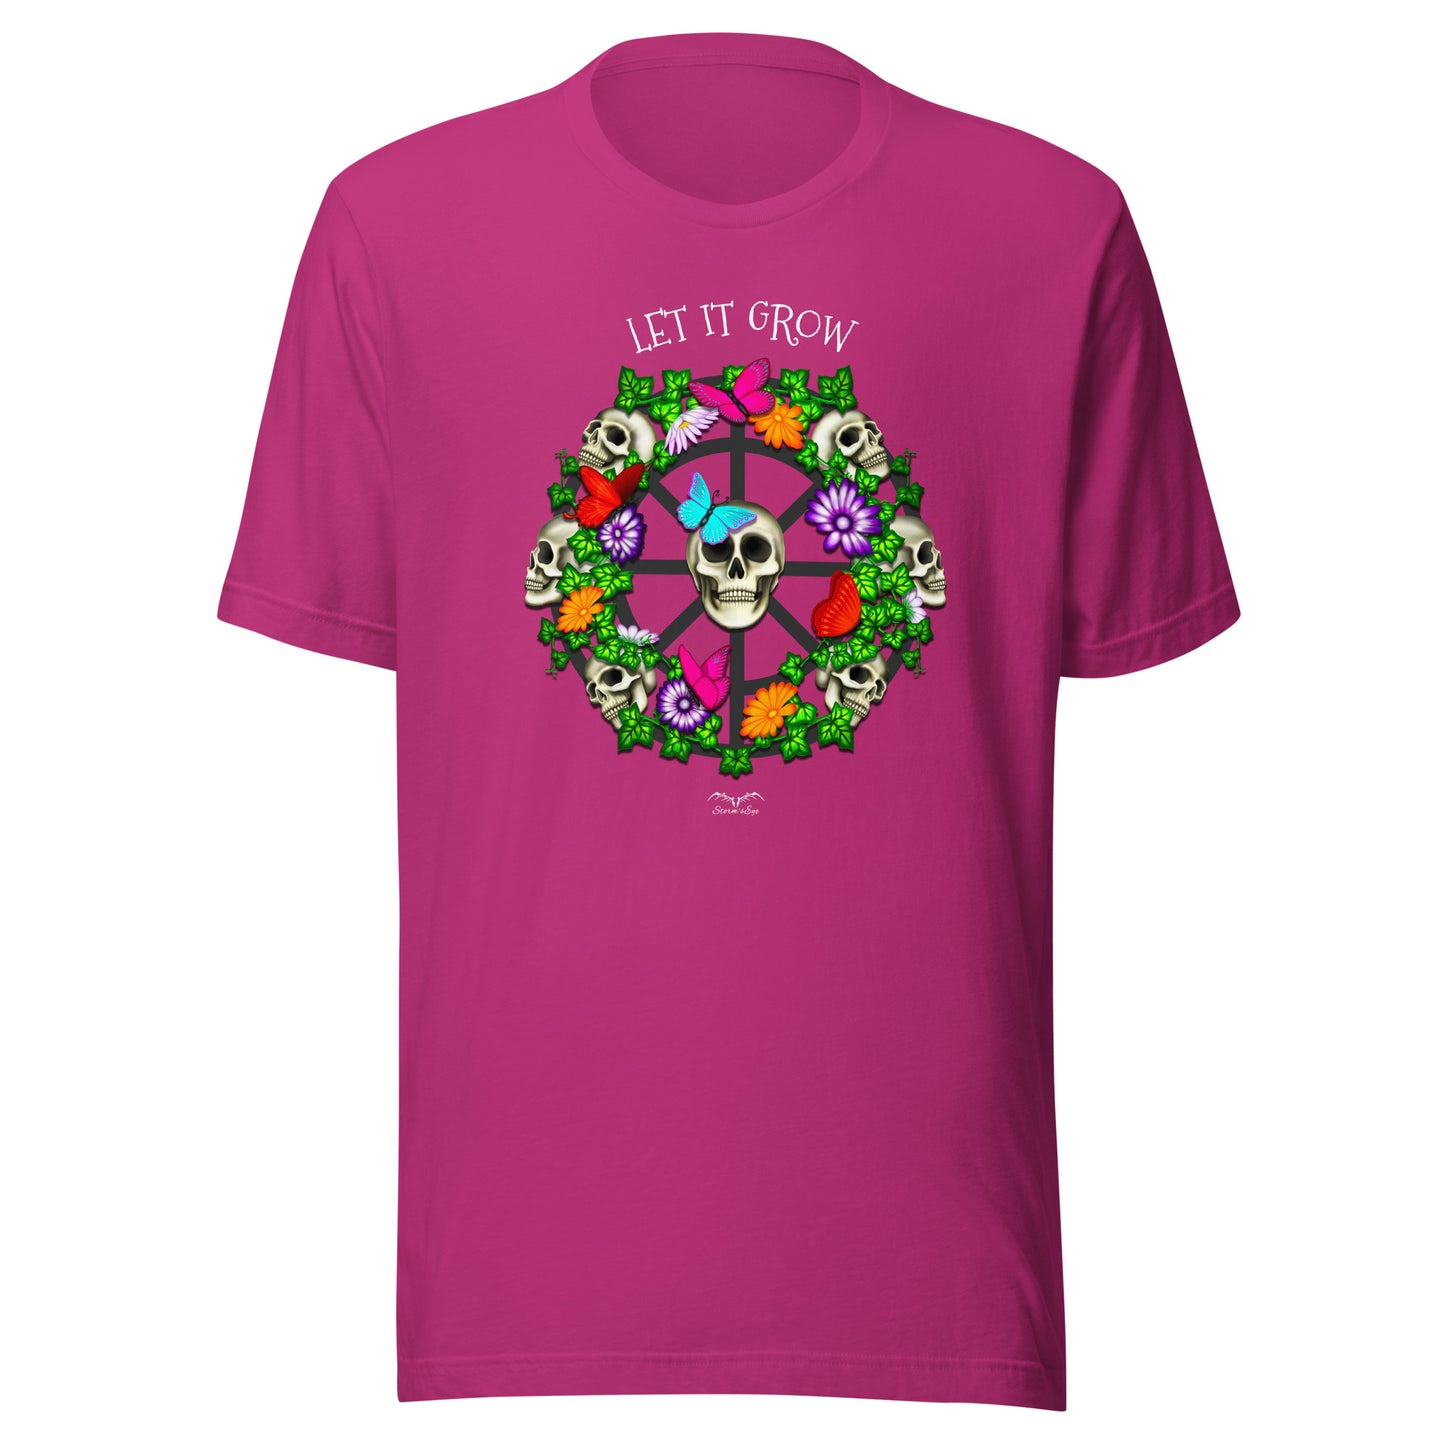 stormseye design skulls and flowers gothic T shirt, flat view pink